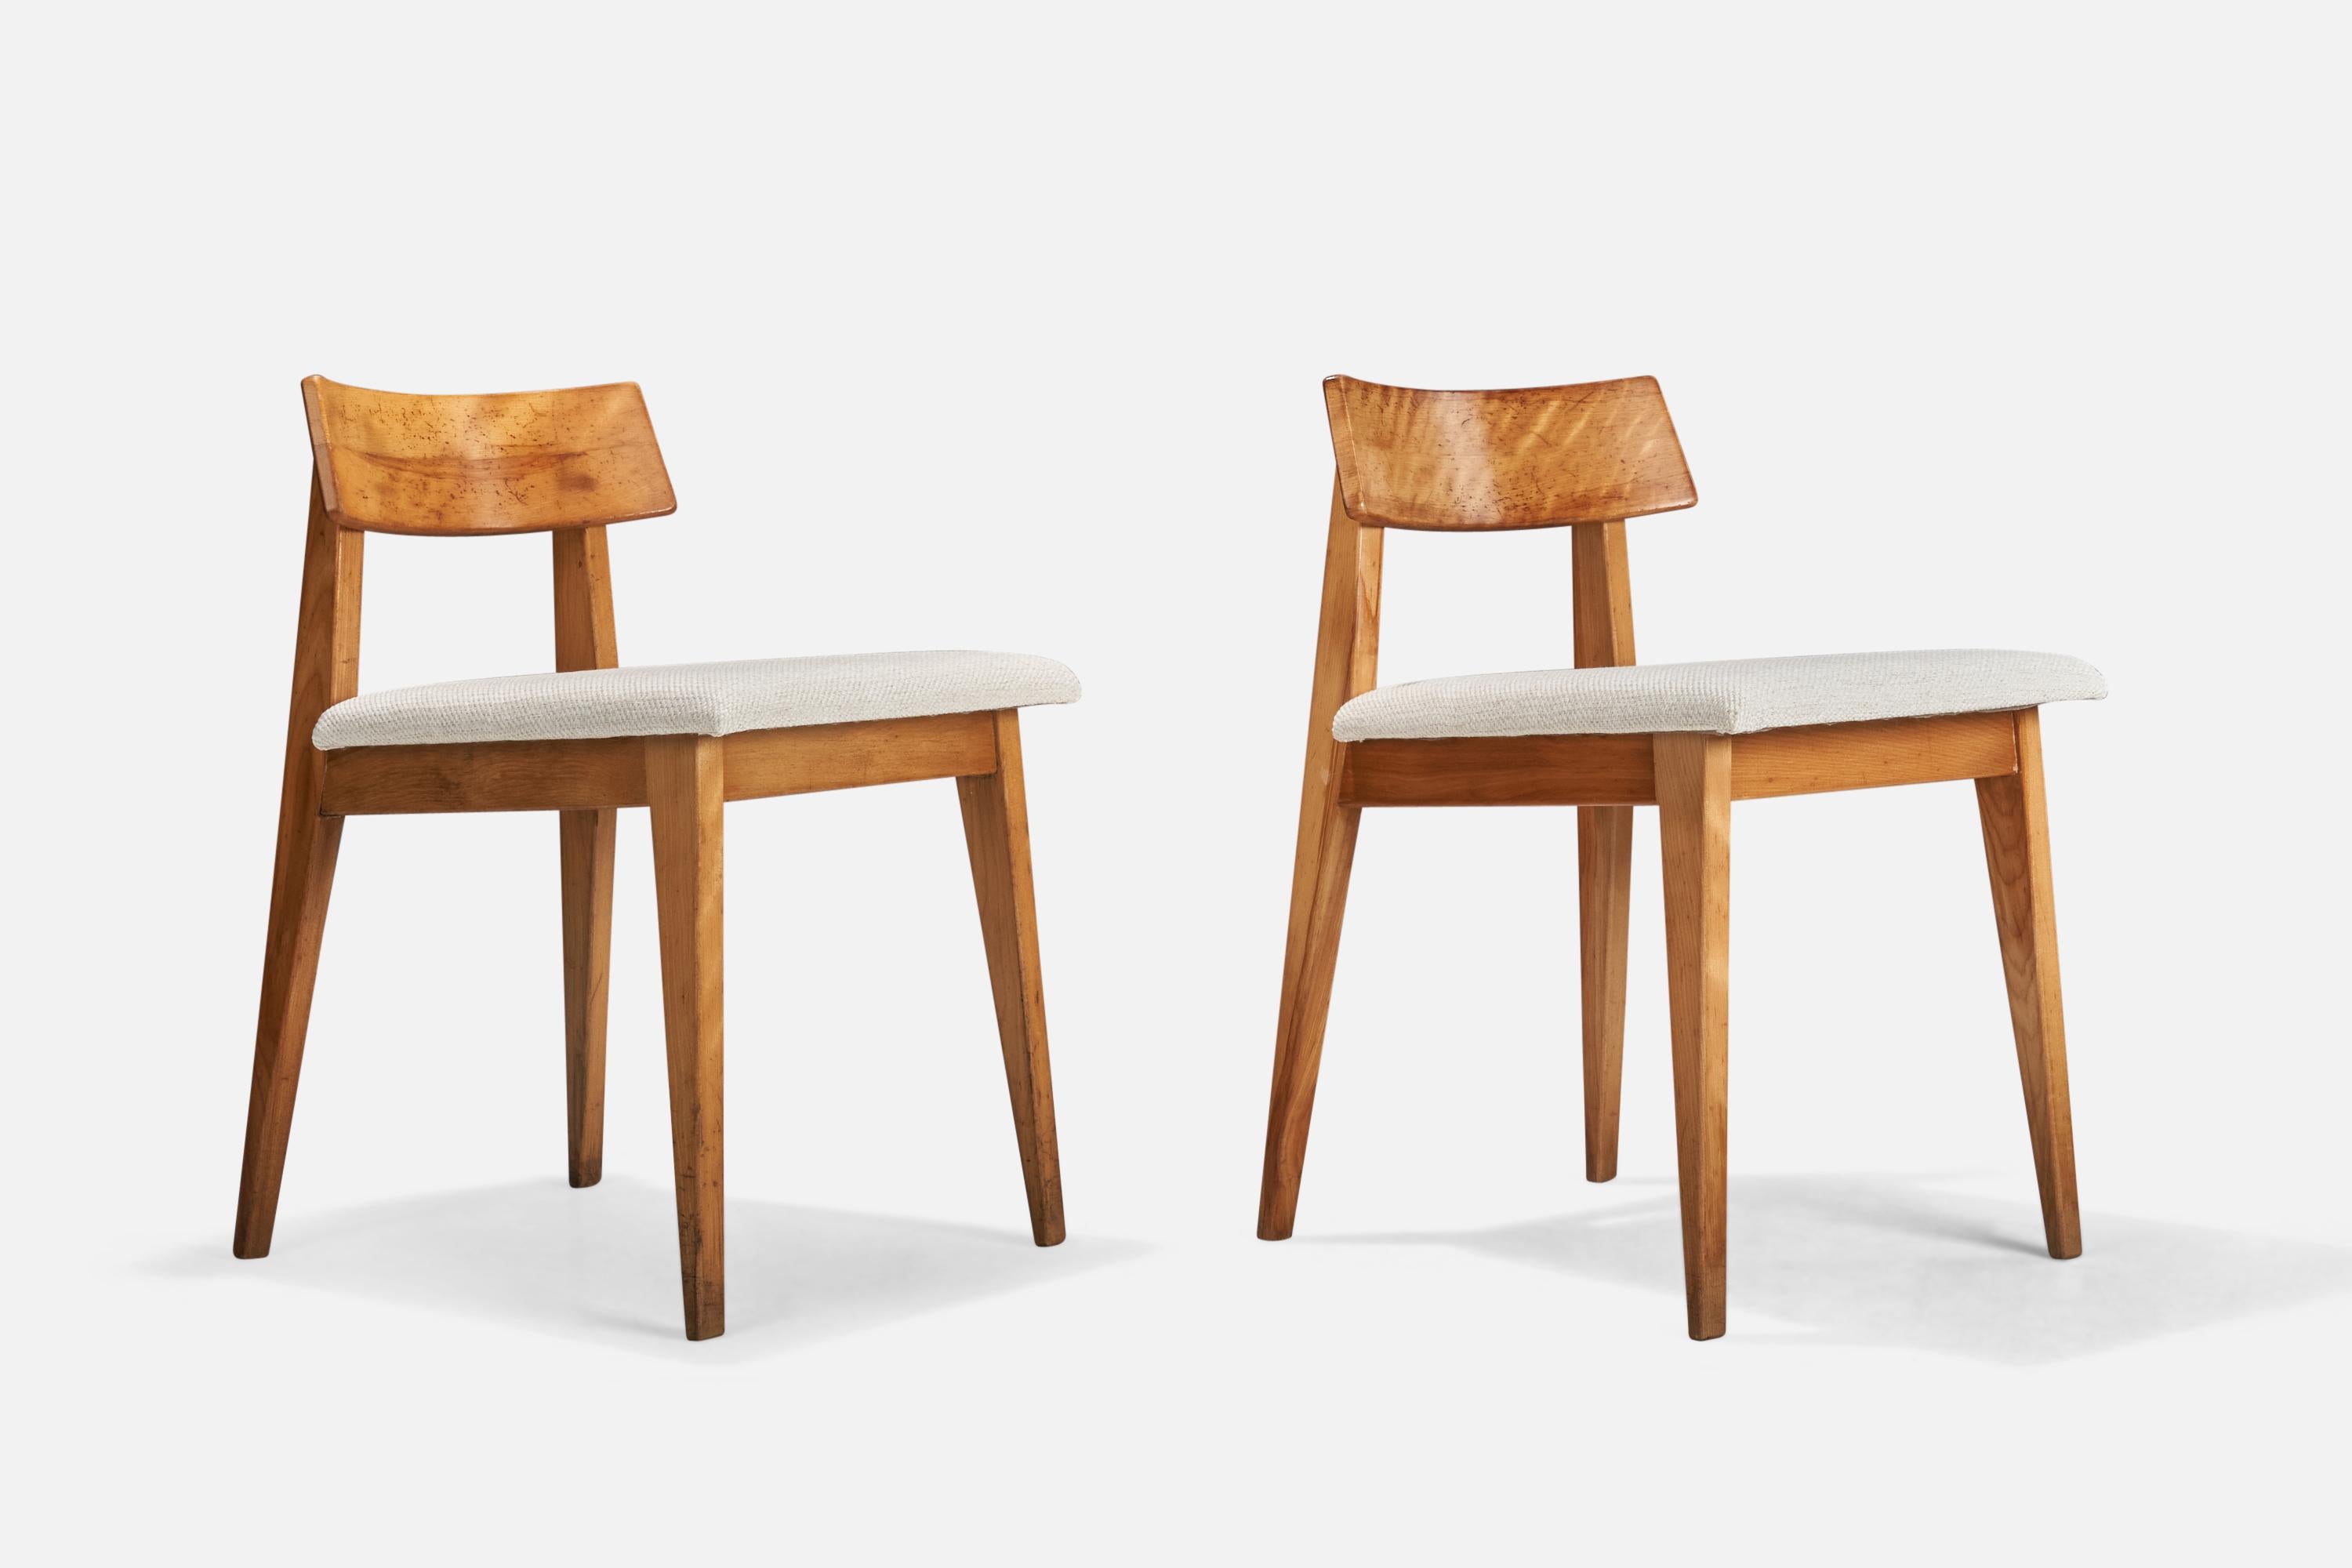 A pair of wood and fabric side chairs designed by Janet Rosenblum produced in New York, USA, 1950s.